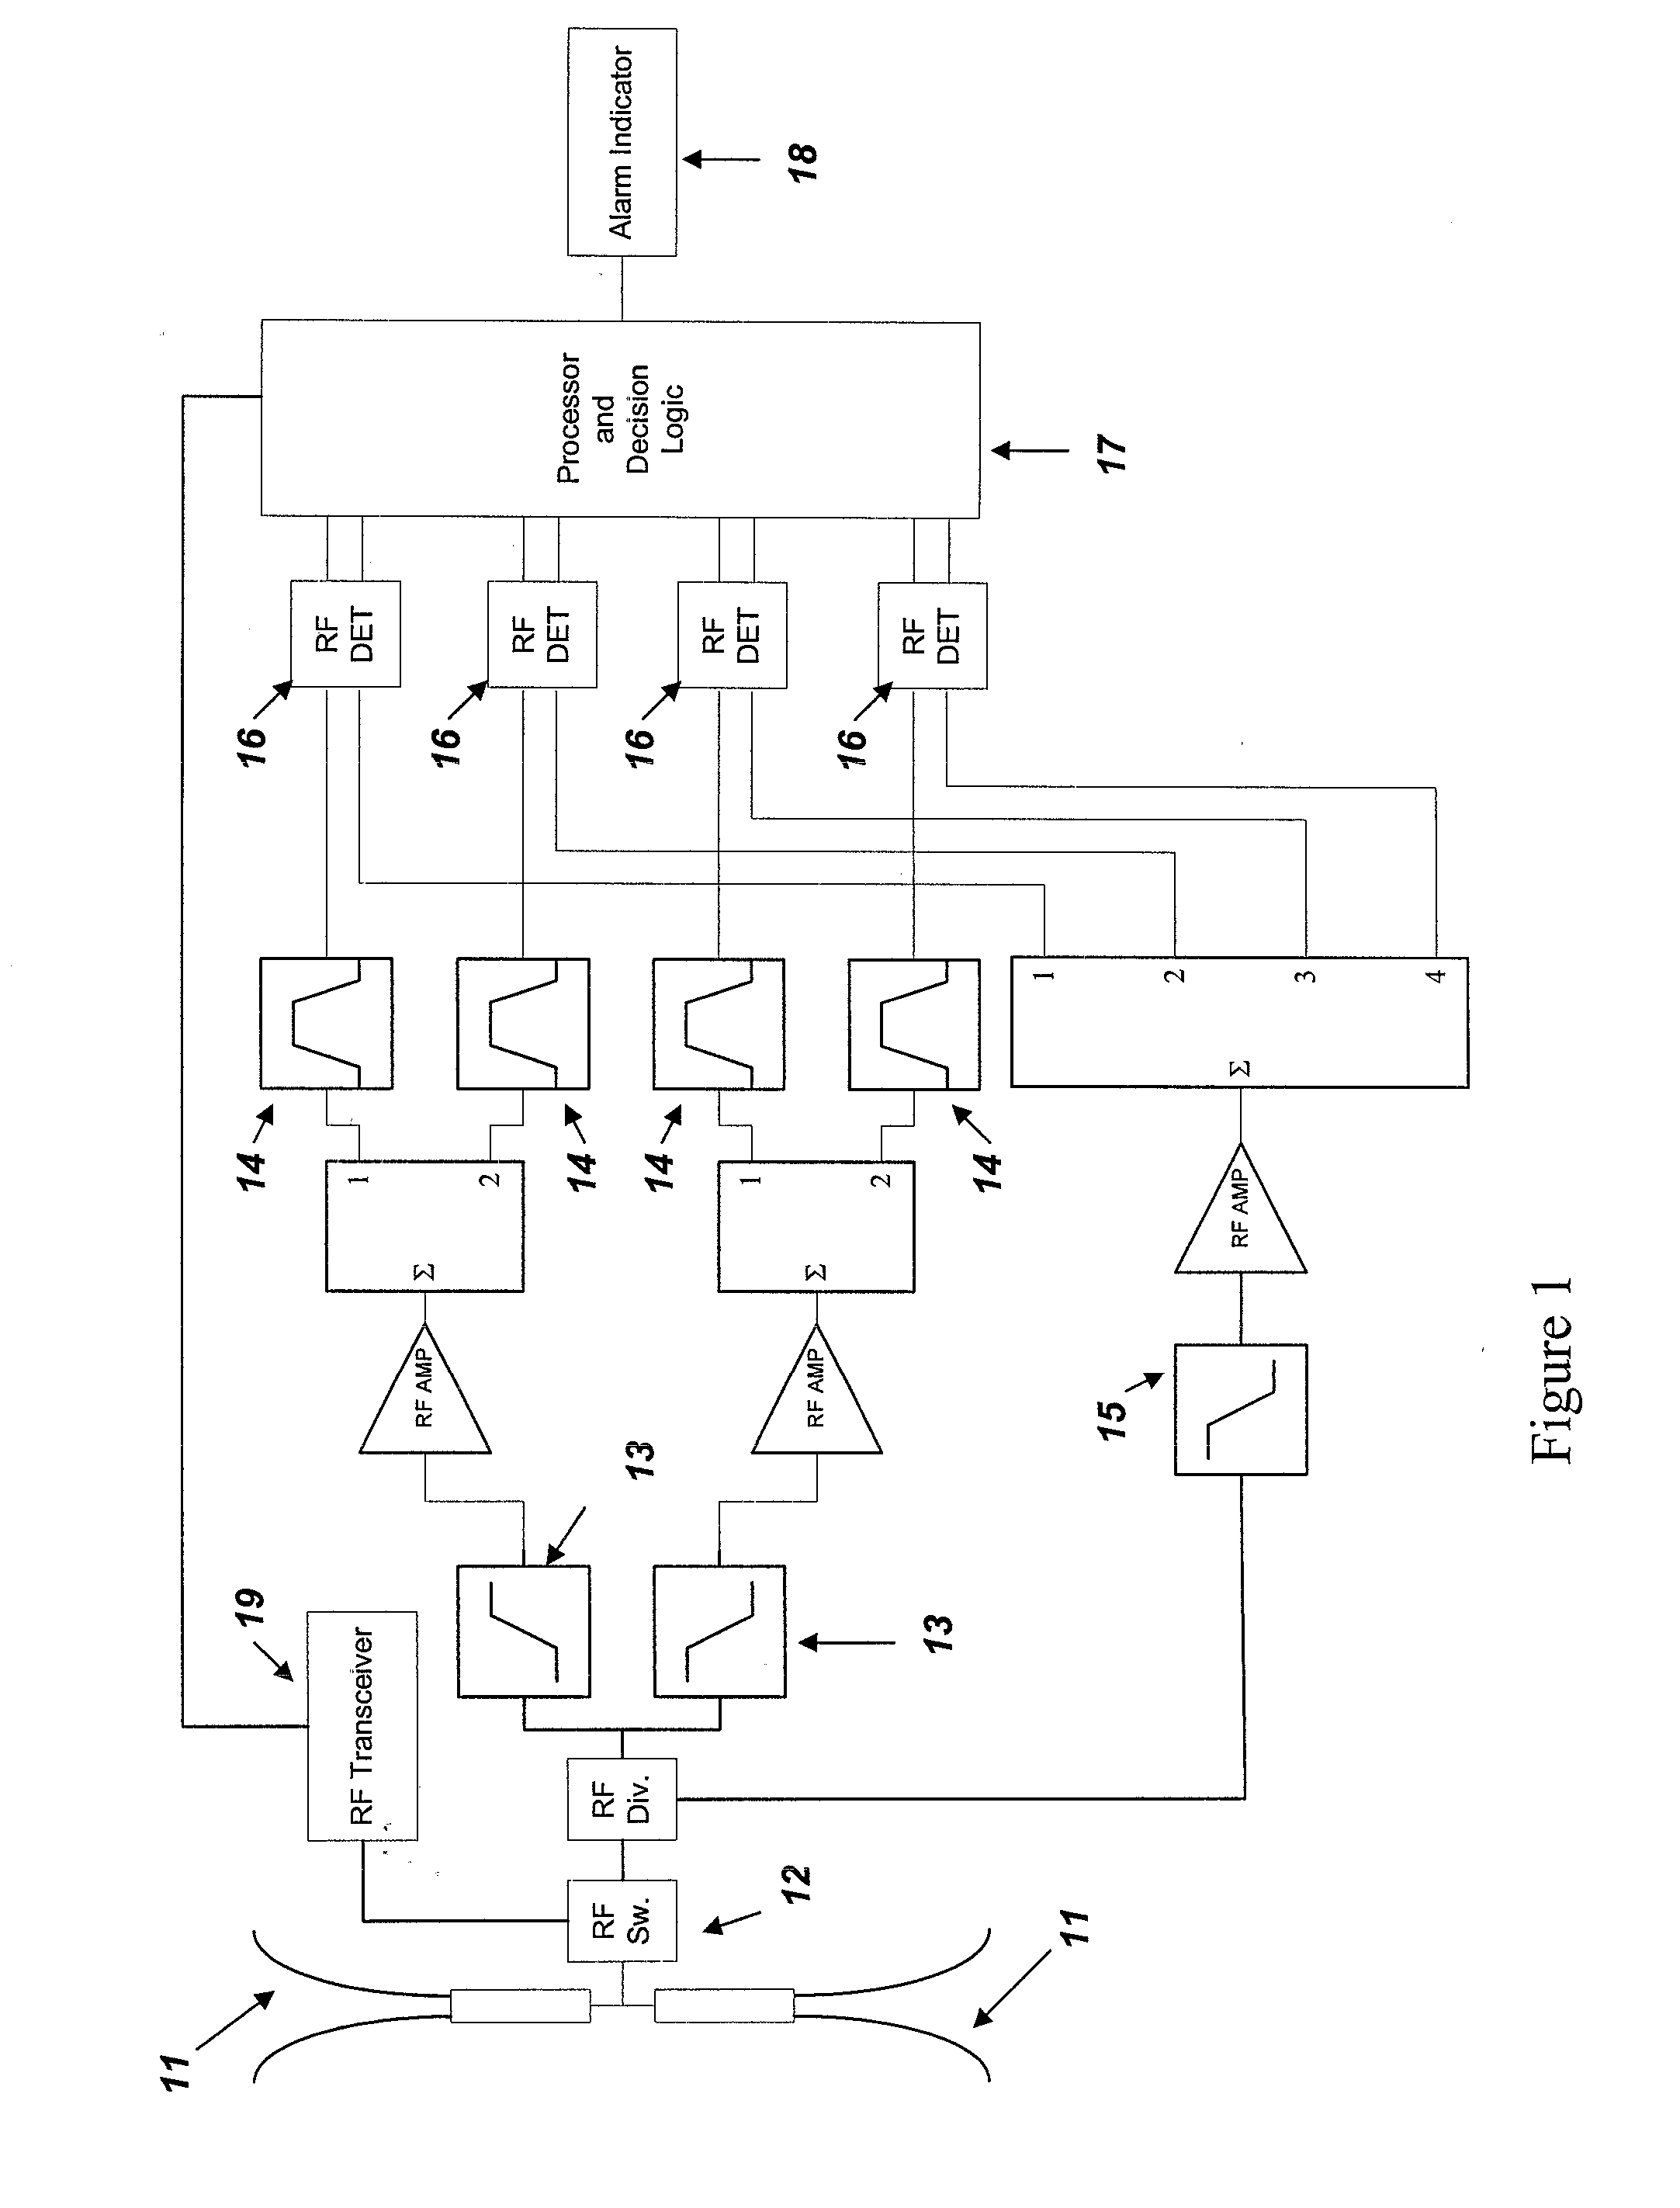 Broadband multi-channel detector with signal and jamming discrimination